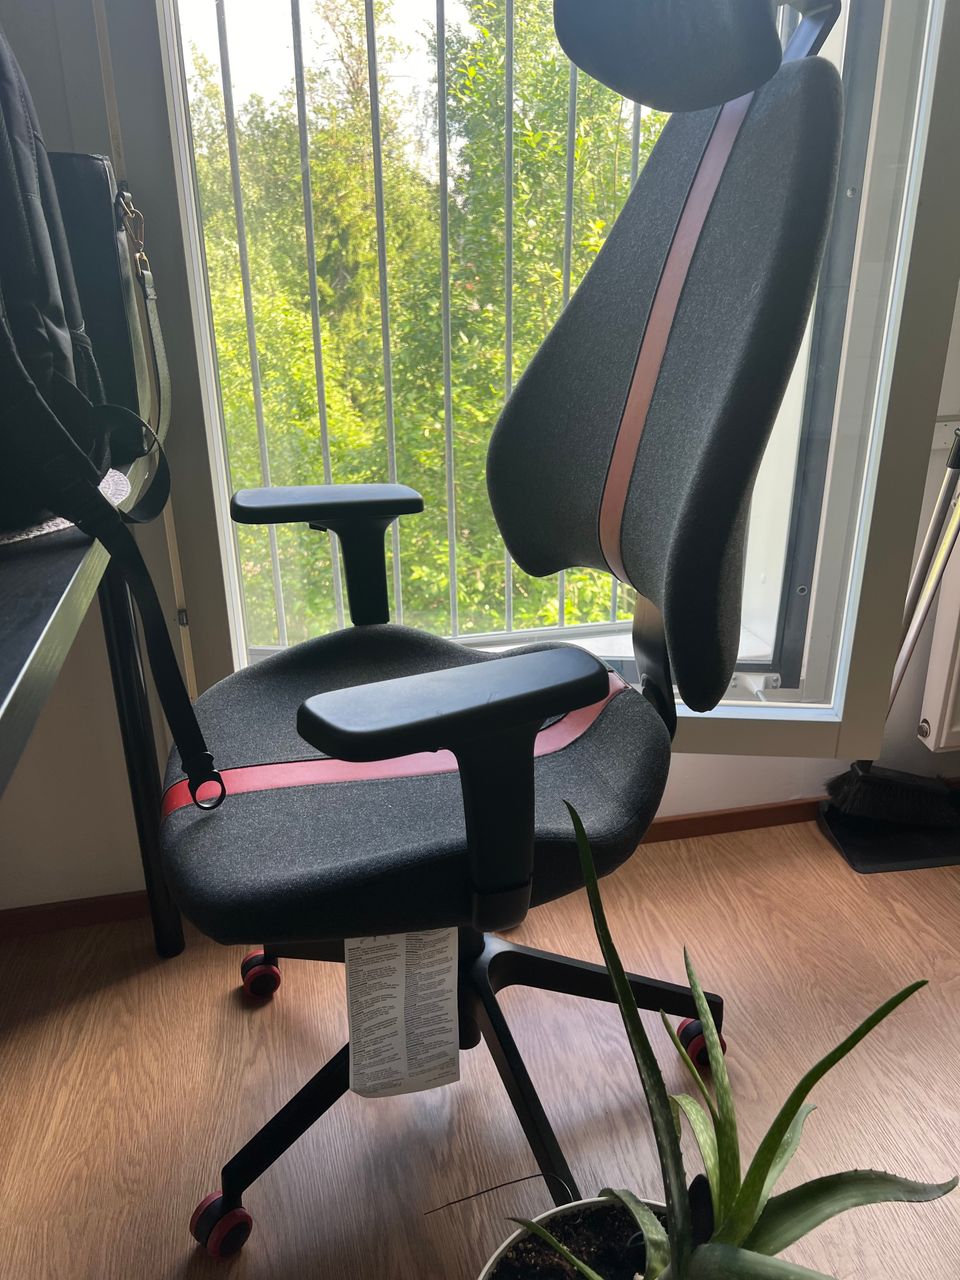 Study chair or office chair or gaming chair